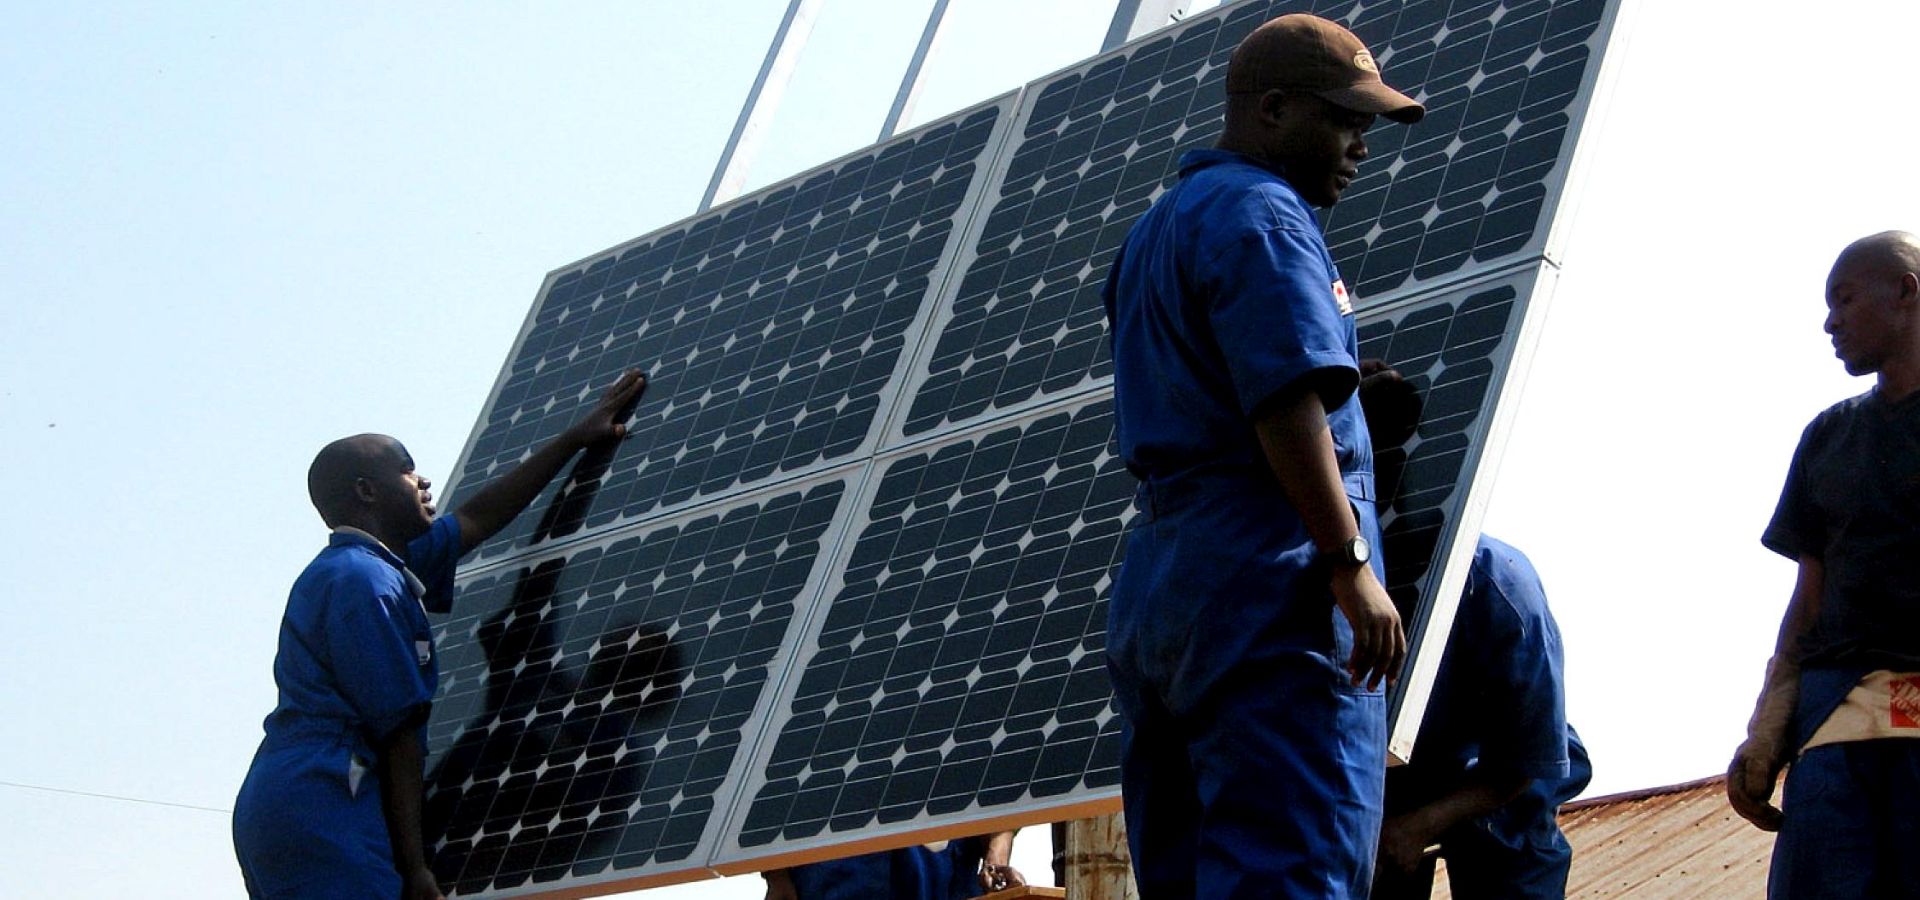 French investment of 87.5 million euros to boost African solar power